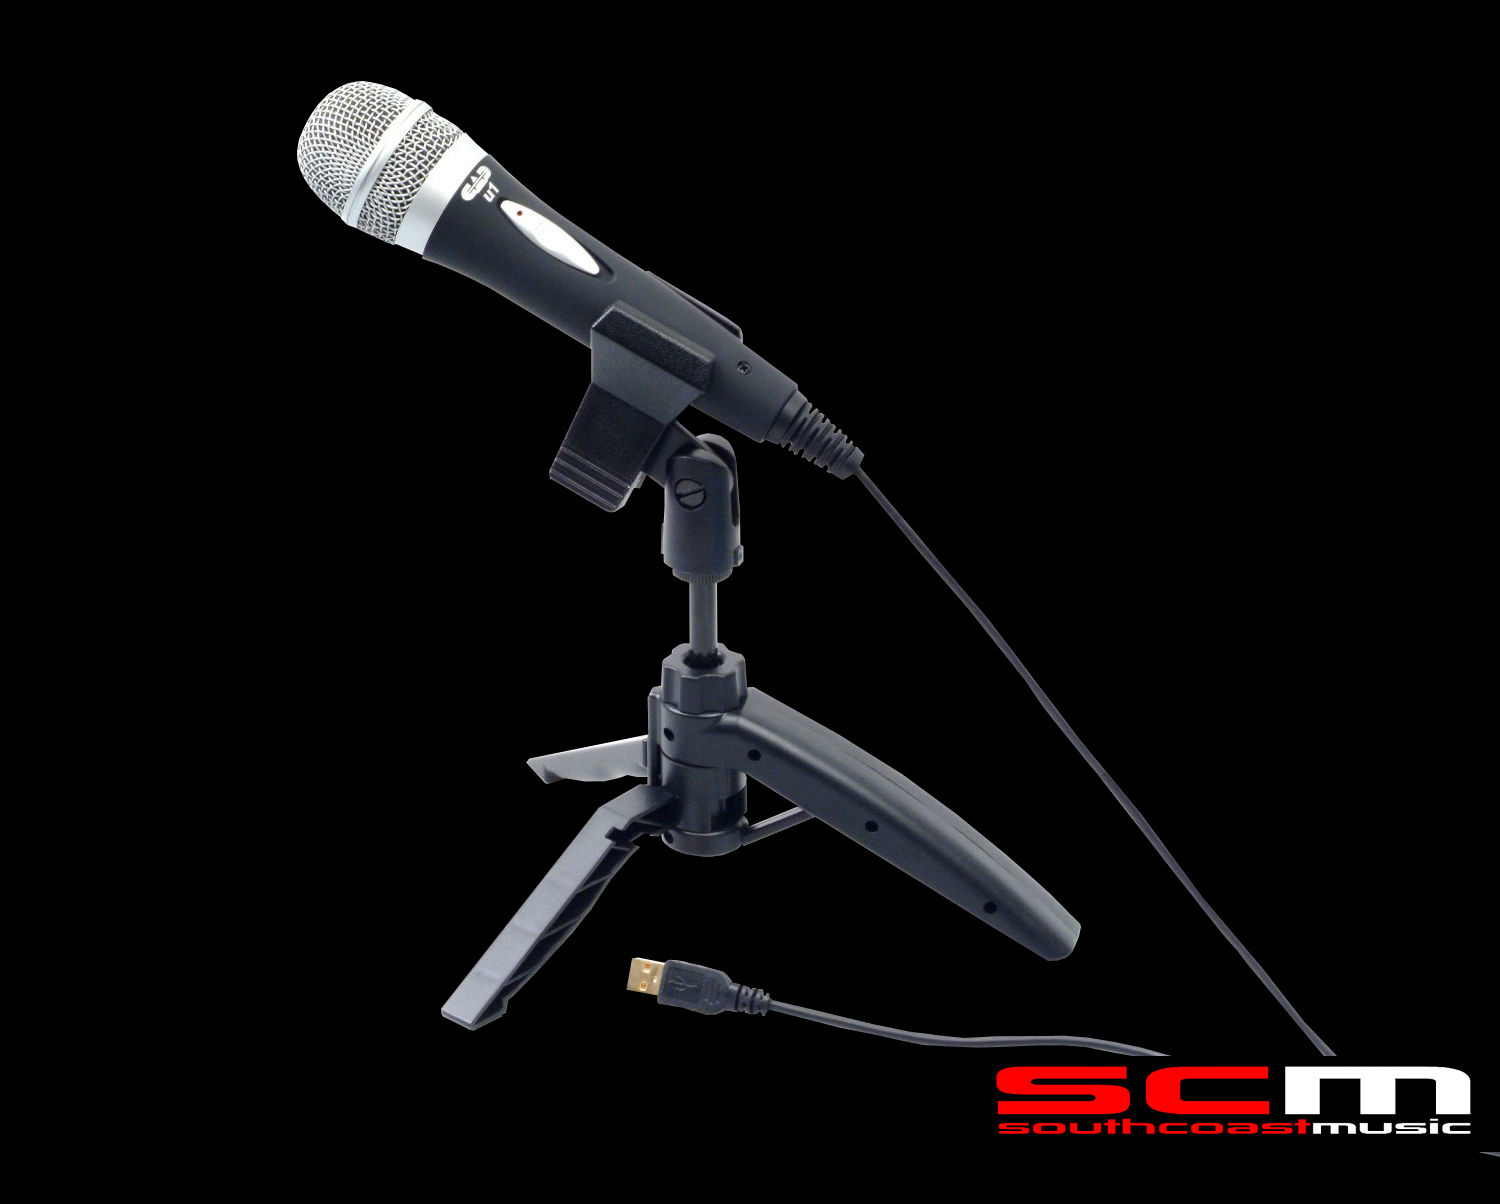 cad-u1-usb-microphone-with-mic-stand-usb-cable-for-podcasting-recording